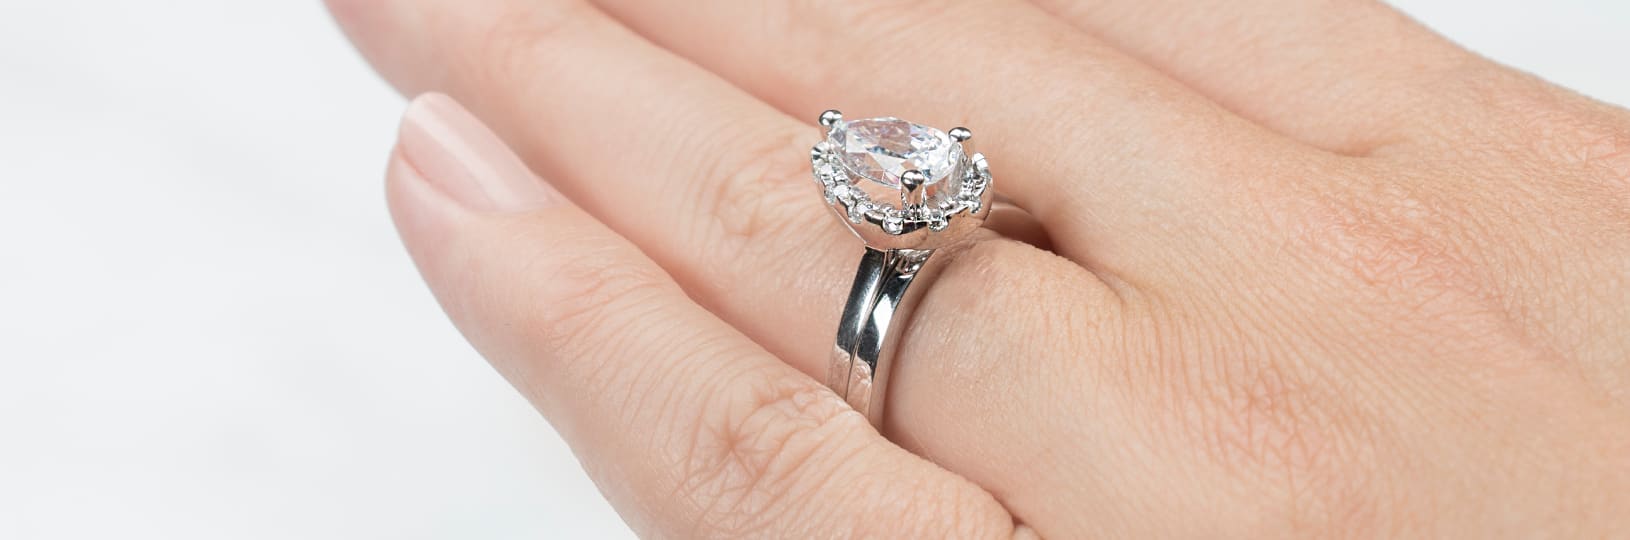 Does the Wedding Band Come With the Engagement Ring? | Diamond Nexus